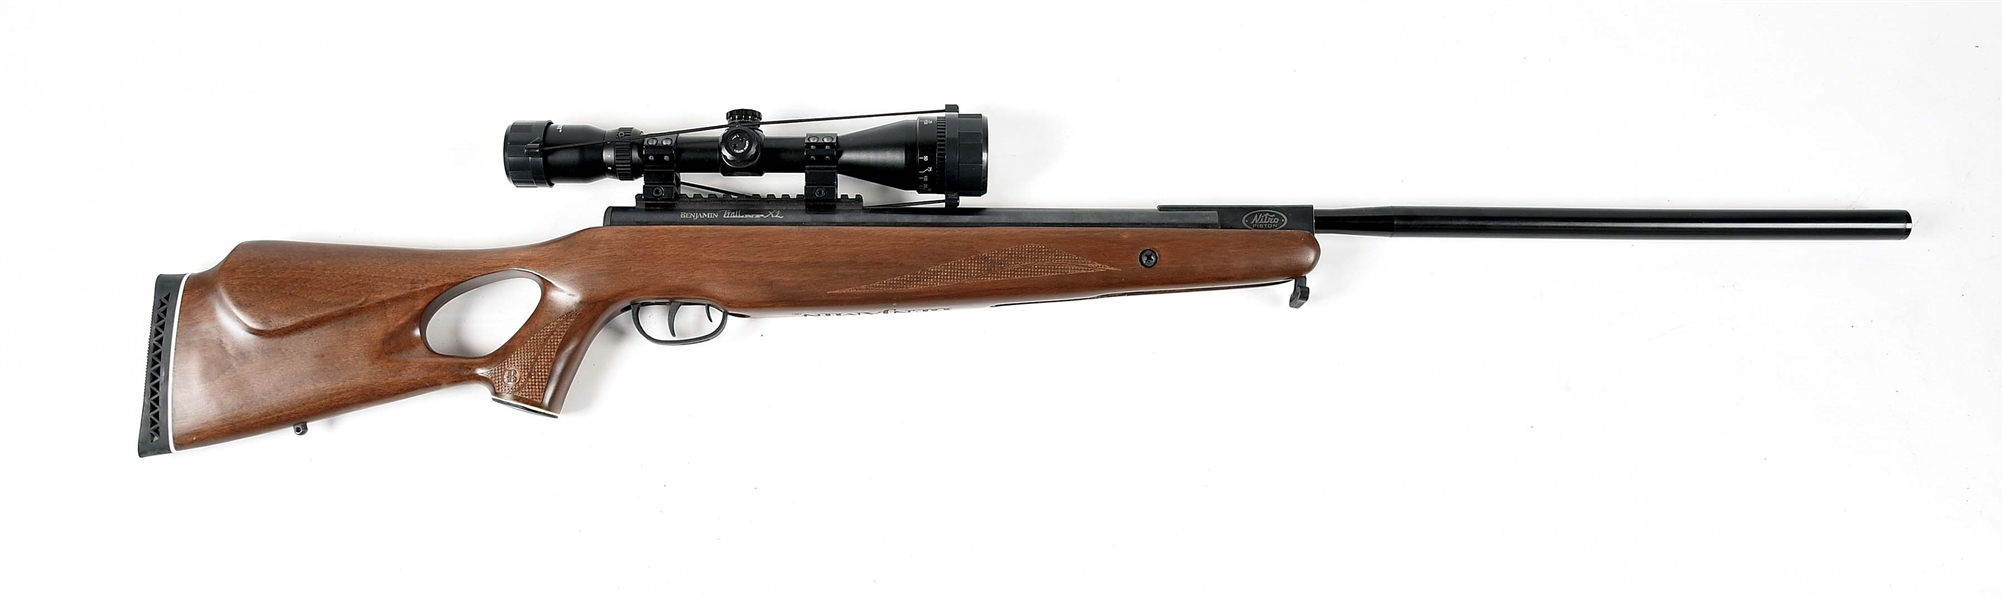 BENJAMIN TRAIL NP XL .177 AIR RIFLE WITH SCOPE.